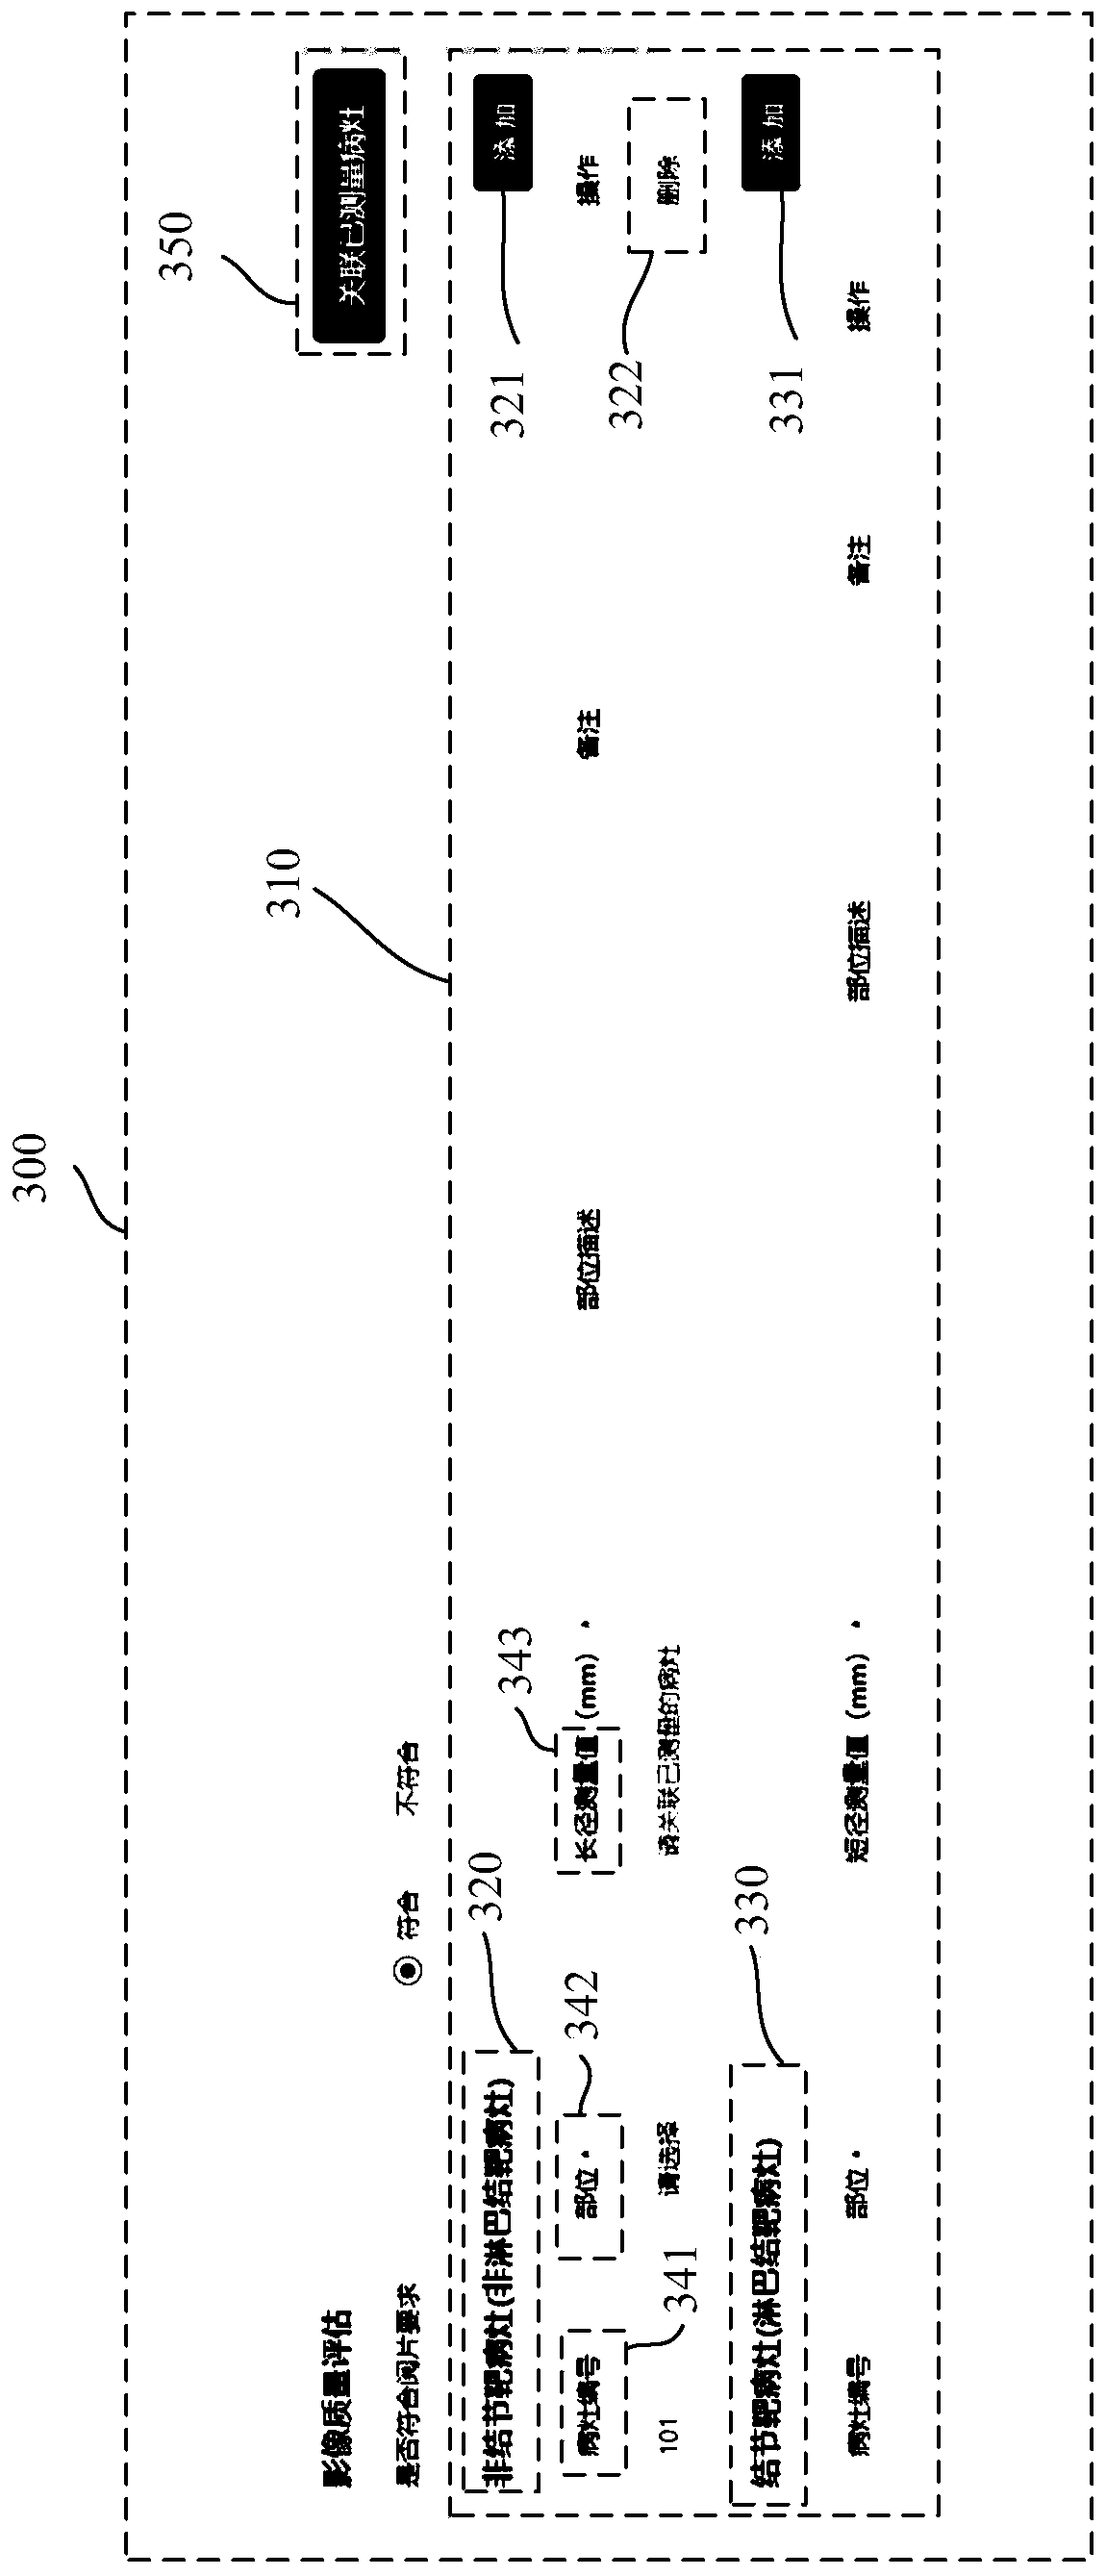 Medical image reading interaction method and system and computer readable medium